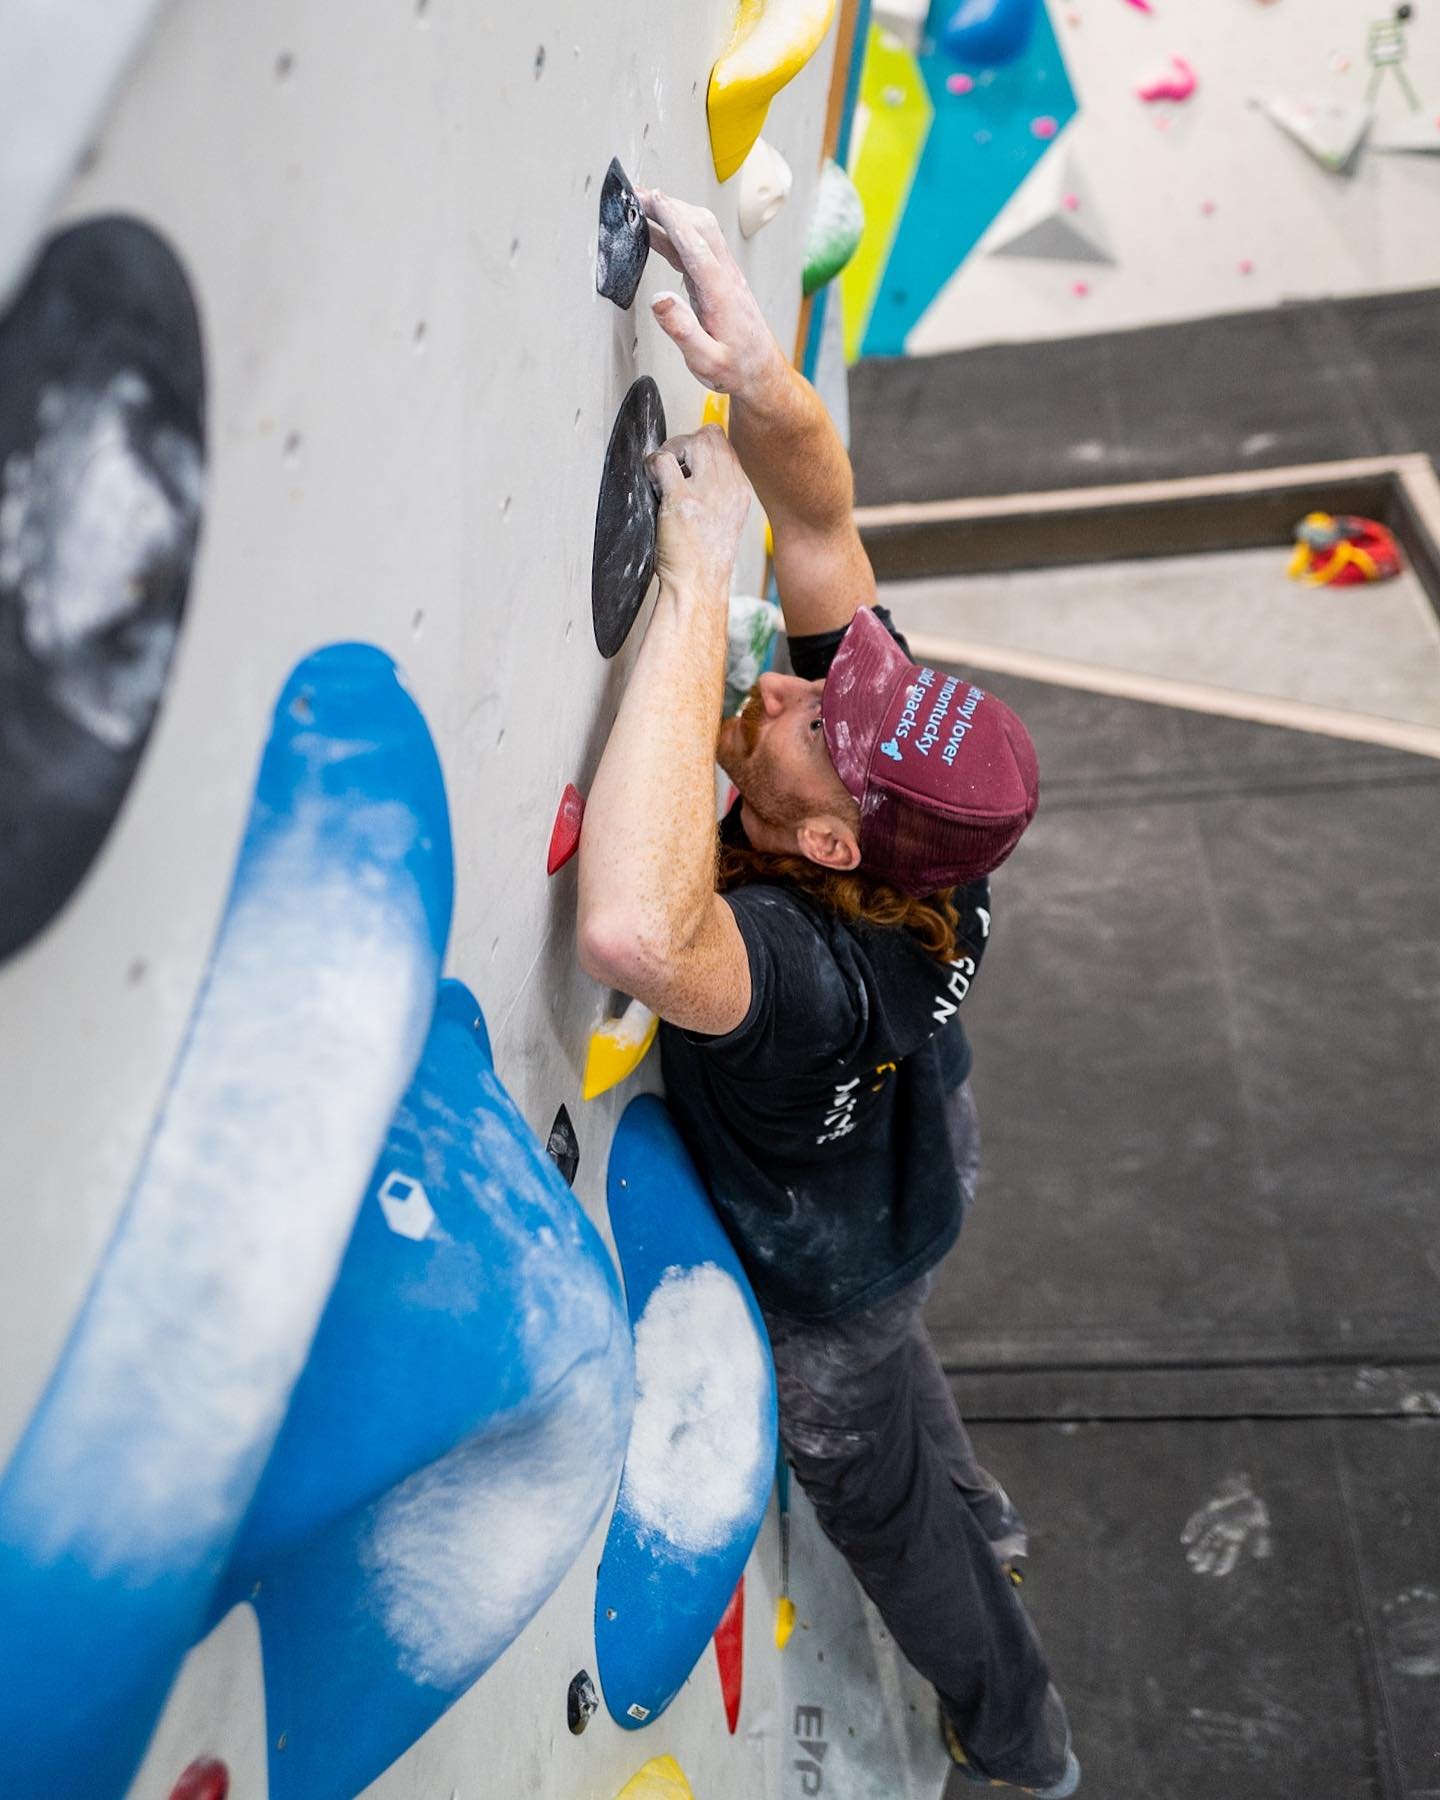 Spring is here and with spring comes new membership options! 

PLUS during the month of May we will be waiving the $49 initiation fee for new membership signups, and new members will receive a Coeur Climbing T-Shirt! Offer ends May 31st

With you&rsq